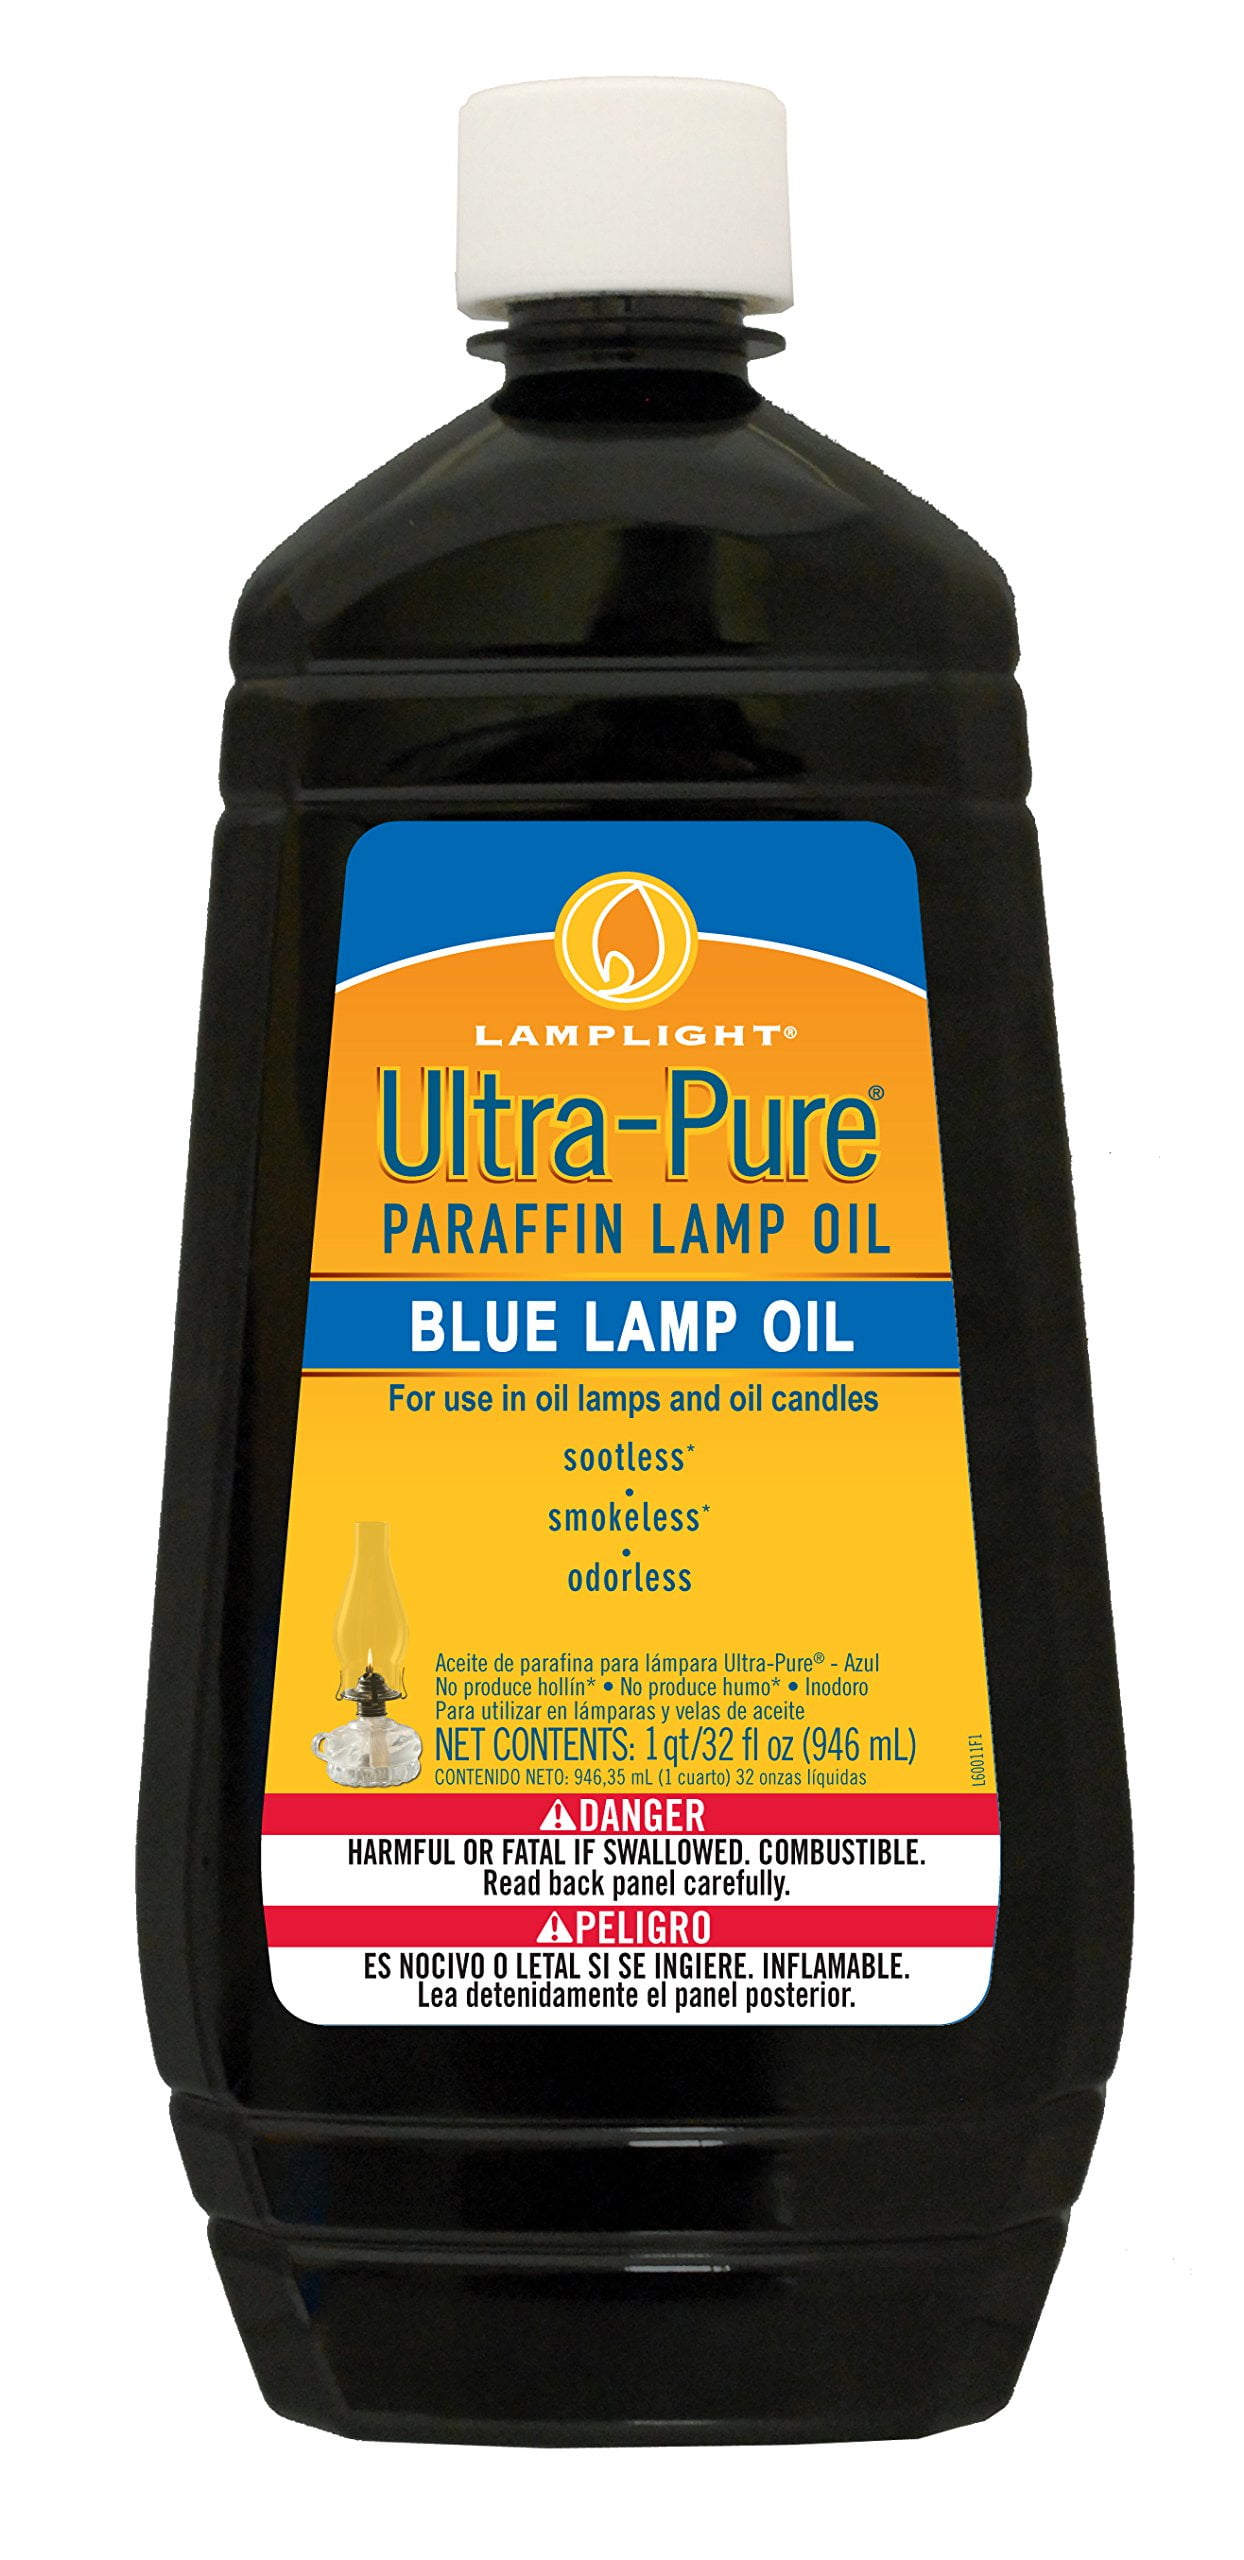 Bryte Paraffin Lamp Oil - Smokeless, Odorless, Clean & Clear, Paraffin Oil  for Indoor and Outdoor Use, Funnel Included, 1 Gallon